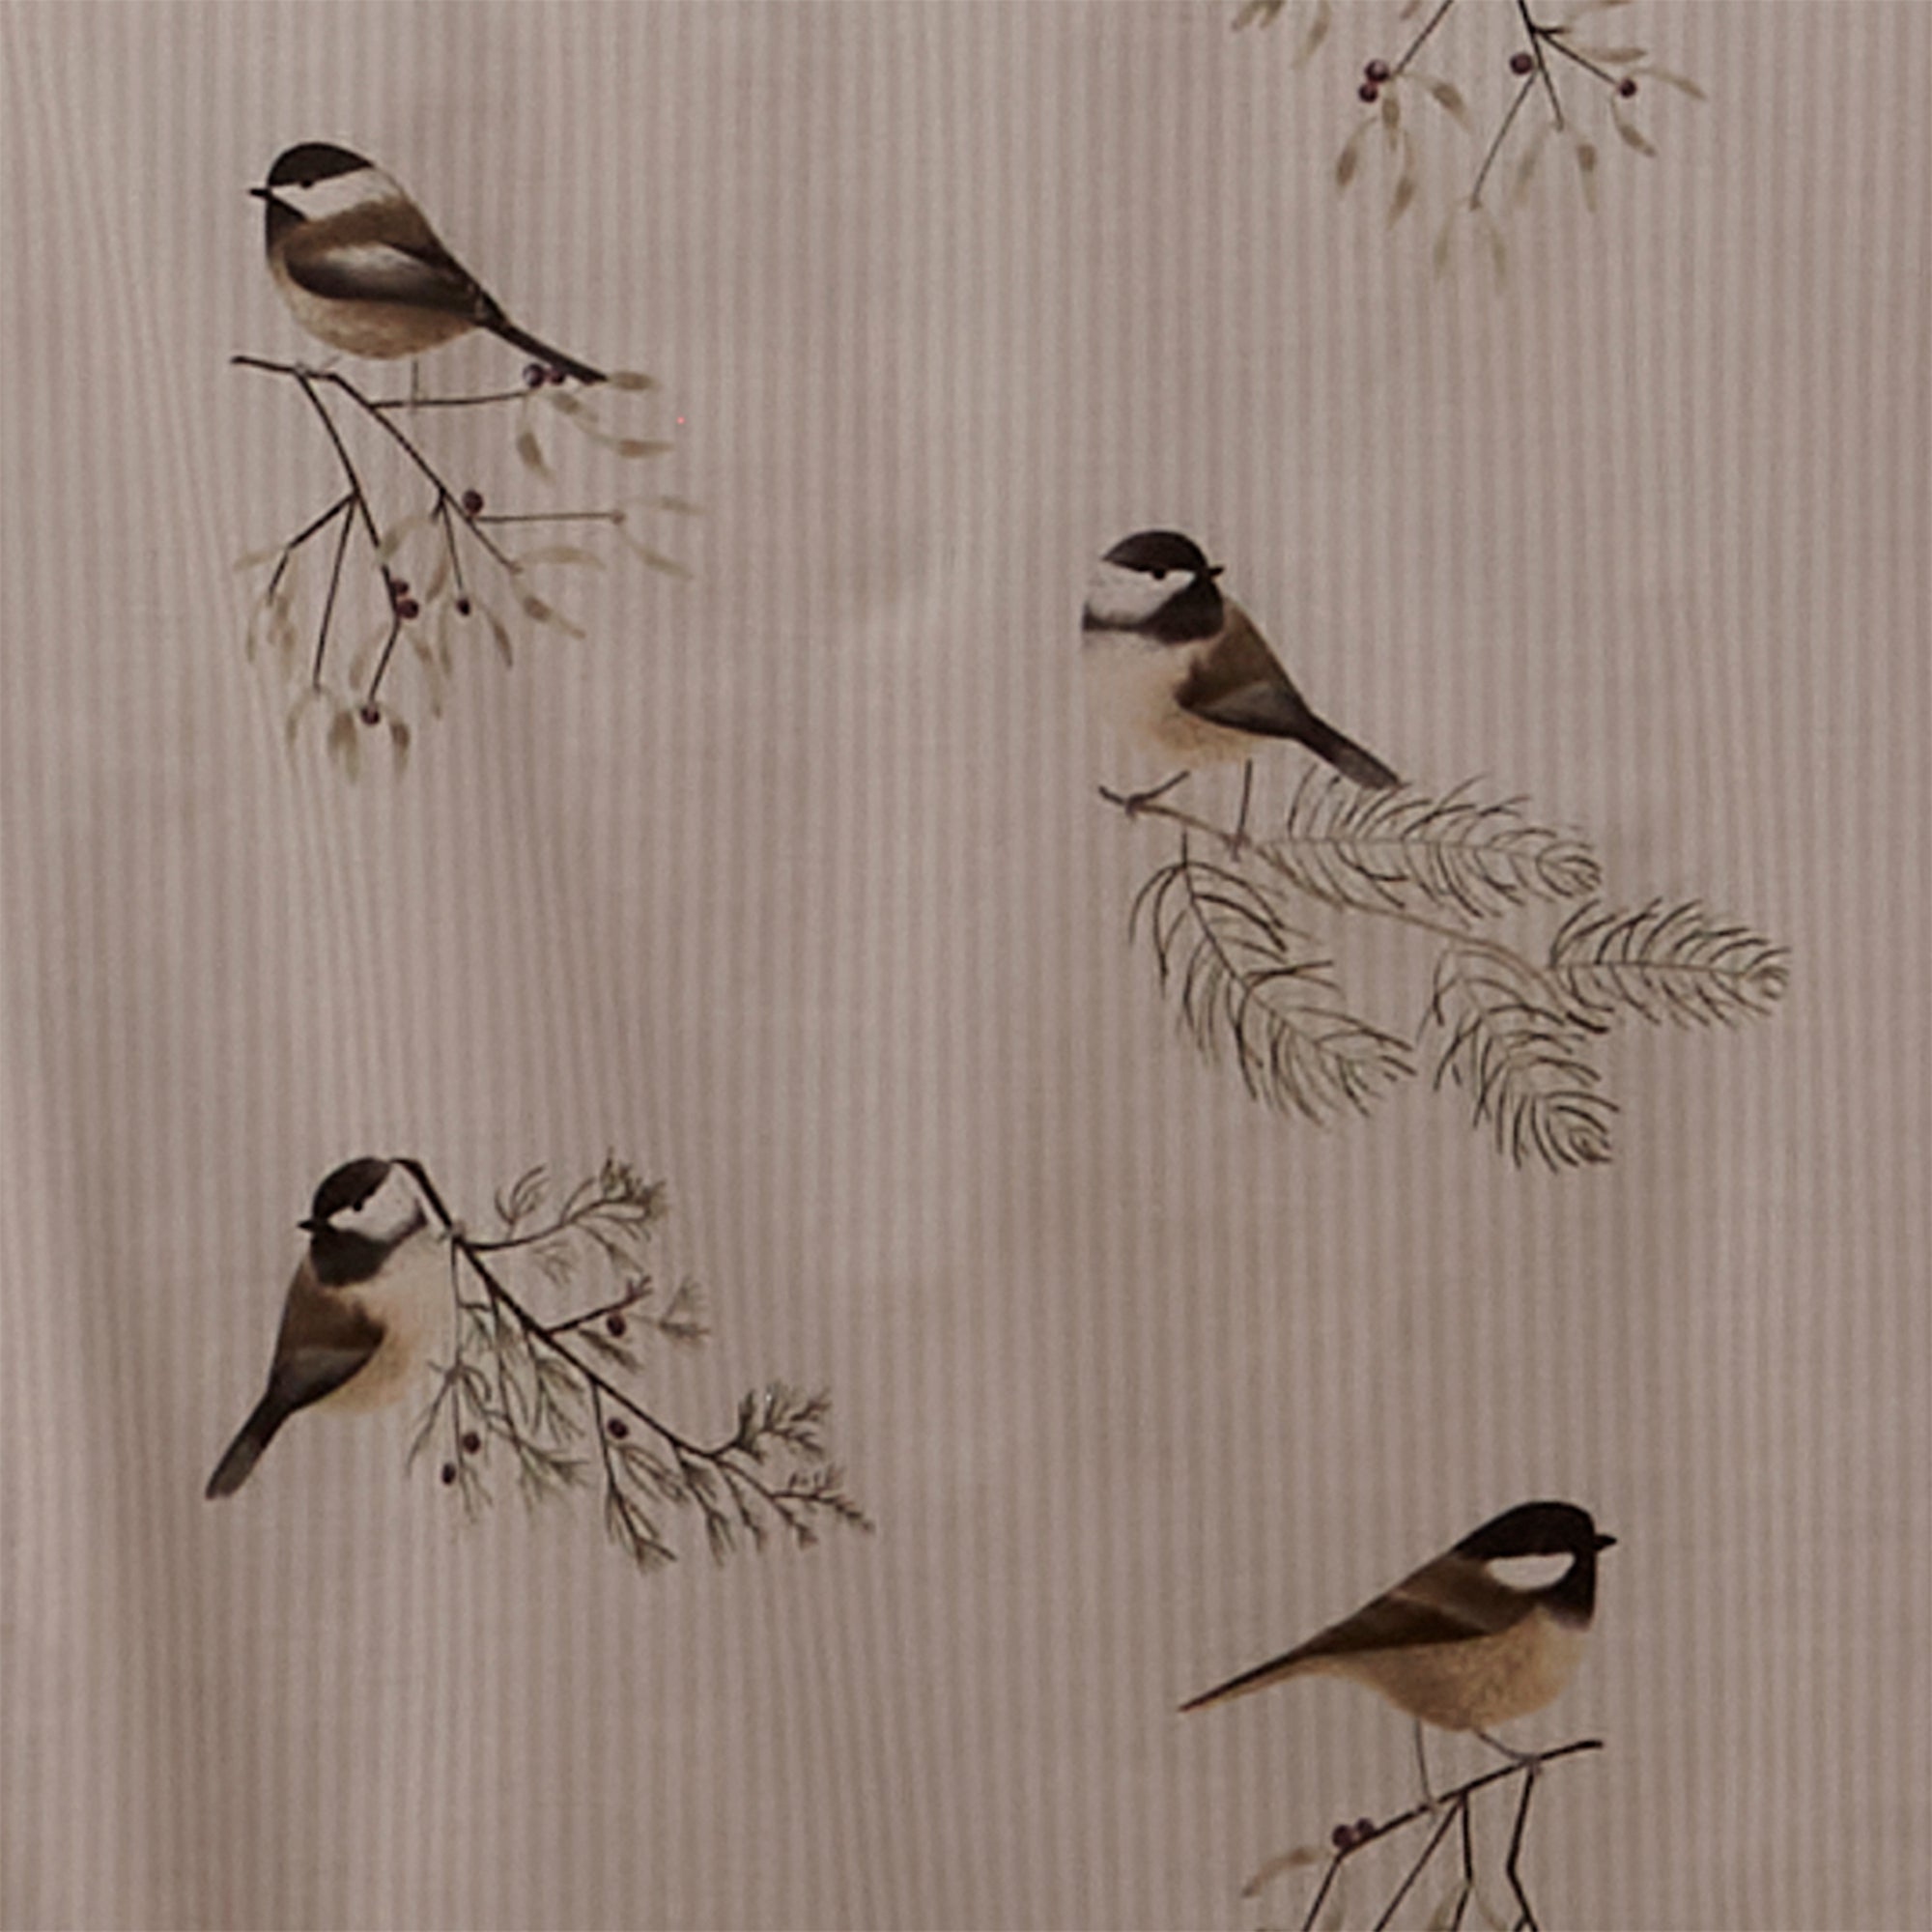 Duvet Cover Set Chickadee's by D&D Lodge in Natural